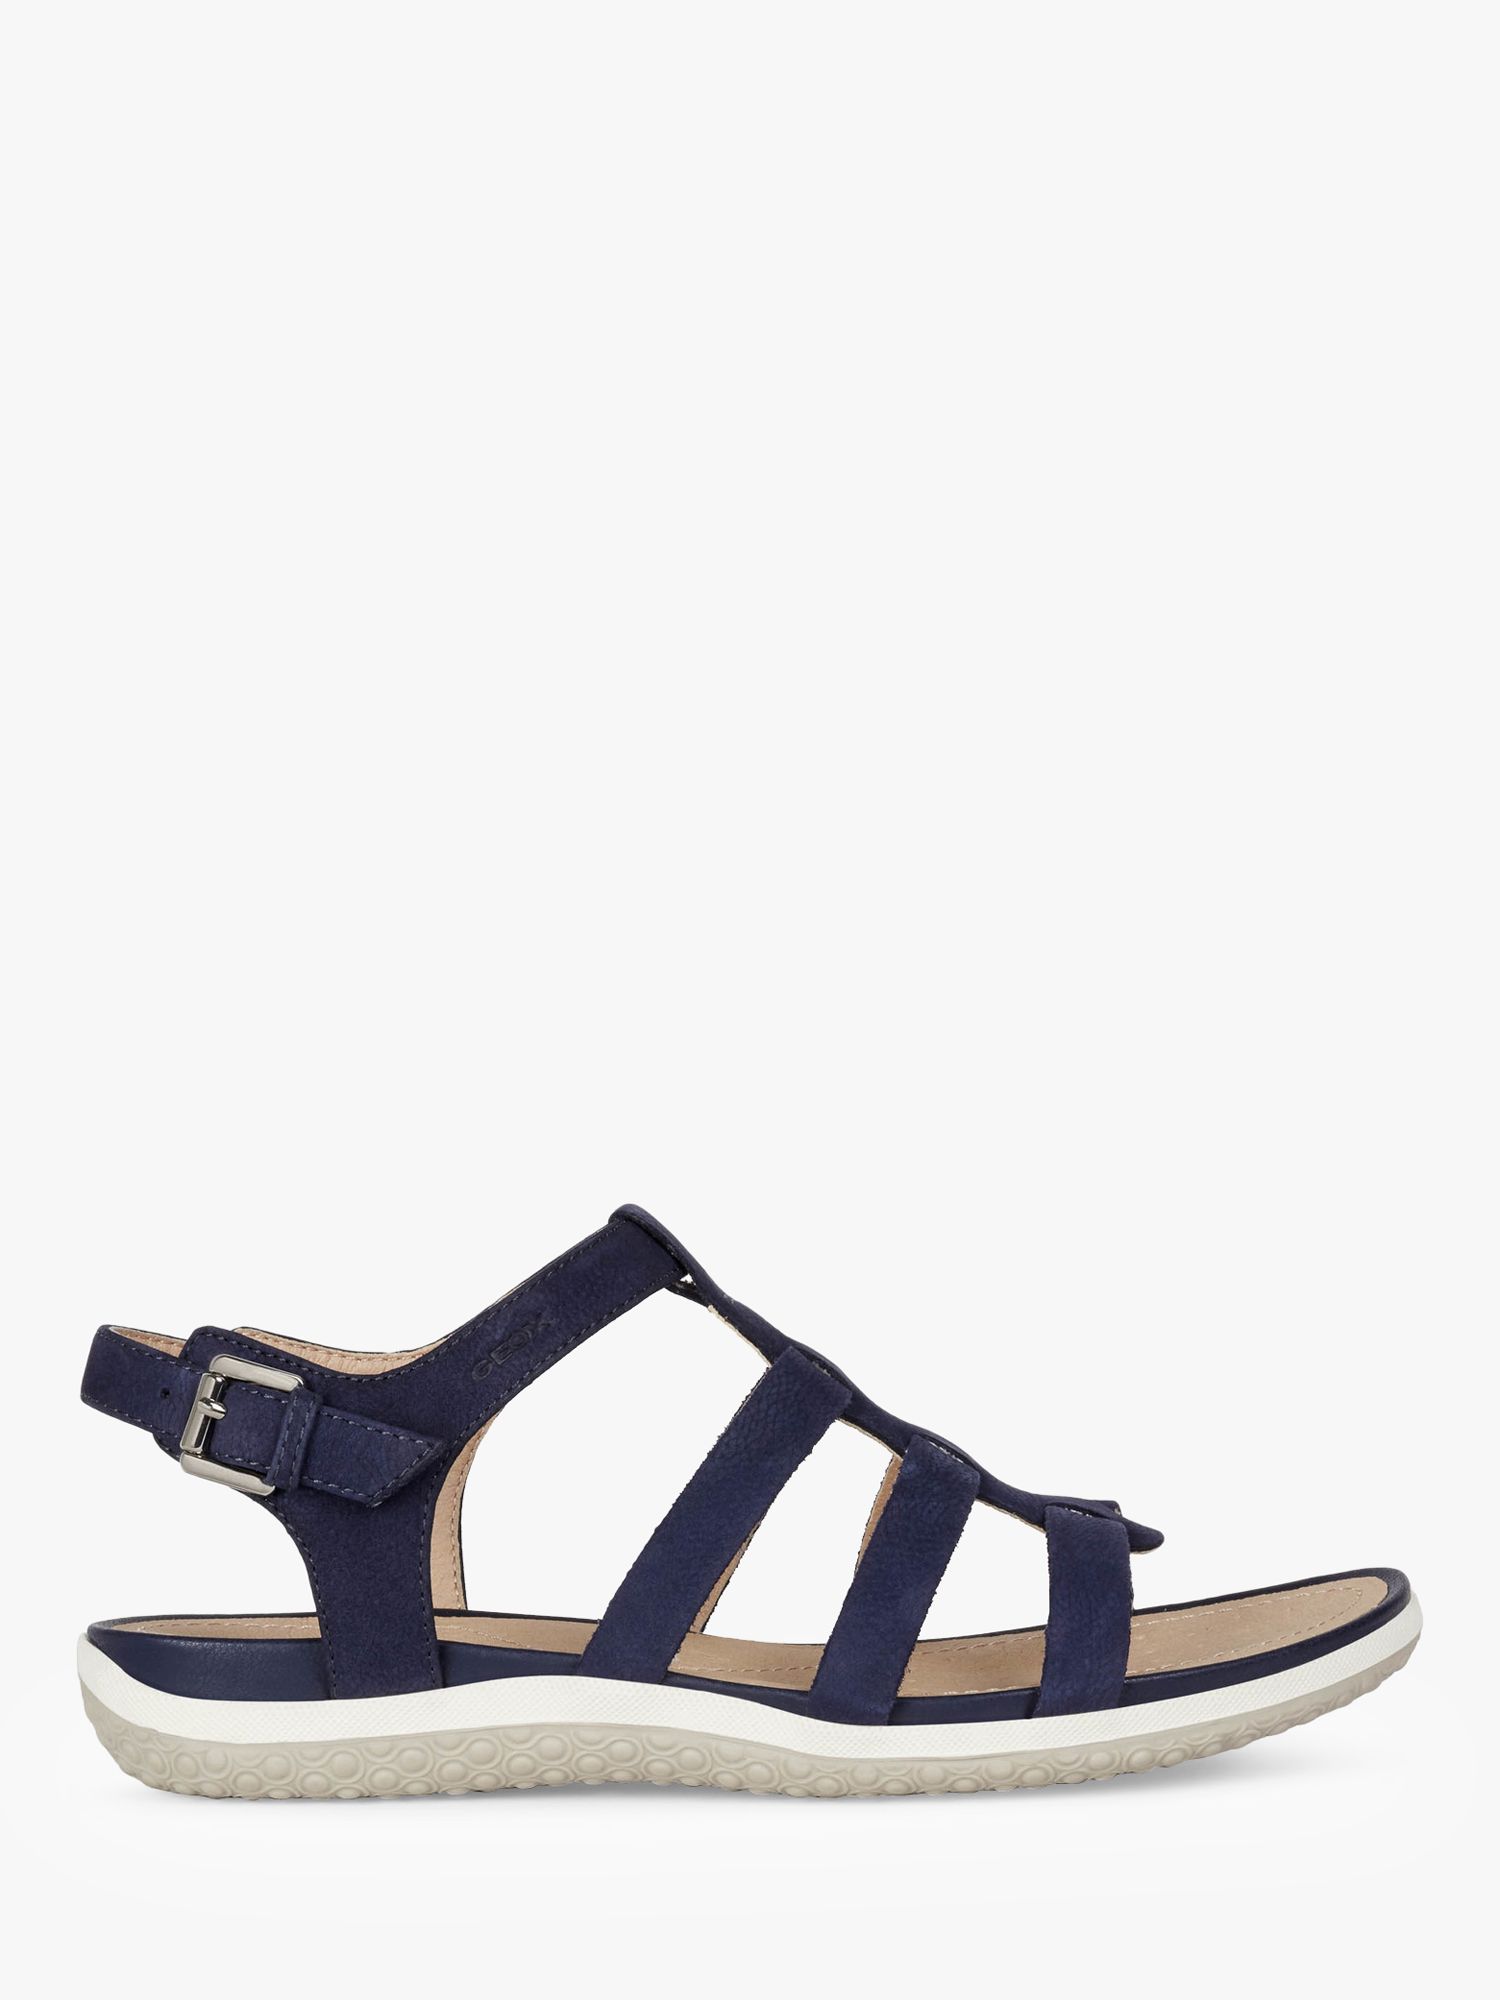 Geox Women's Vega Wide Fit Leather Sandals, Blue at John Lewis & Partners